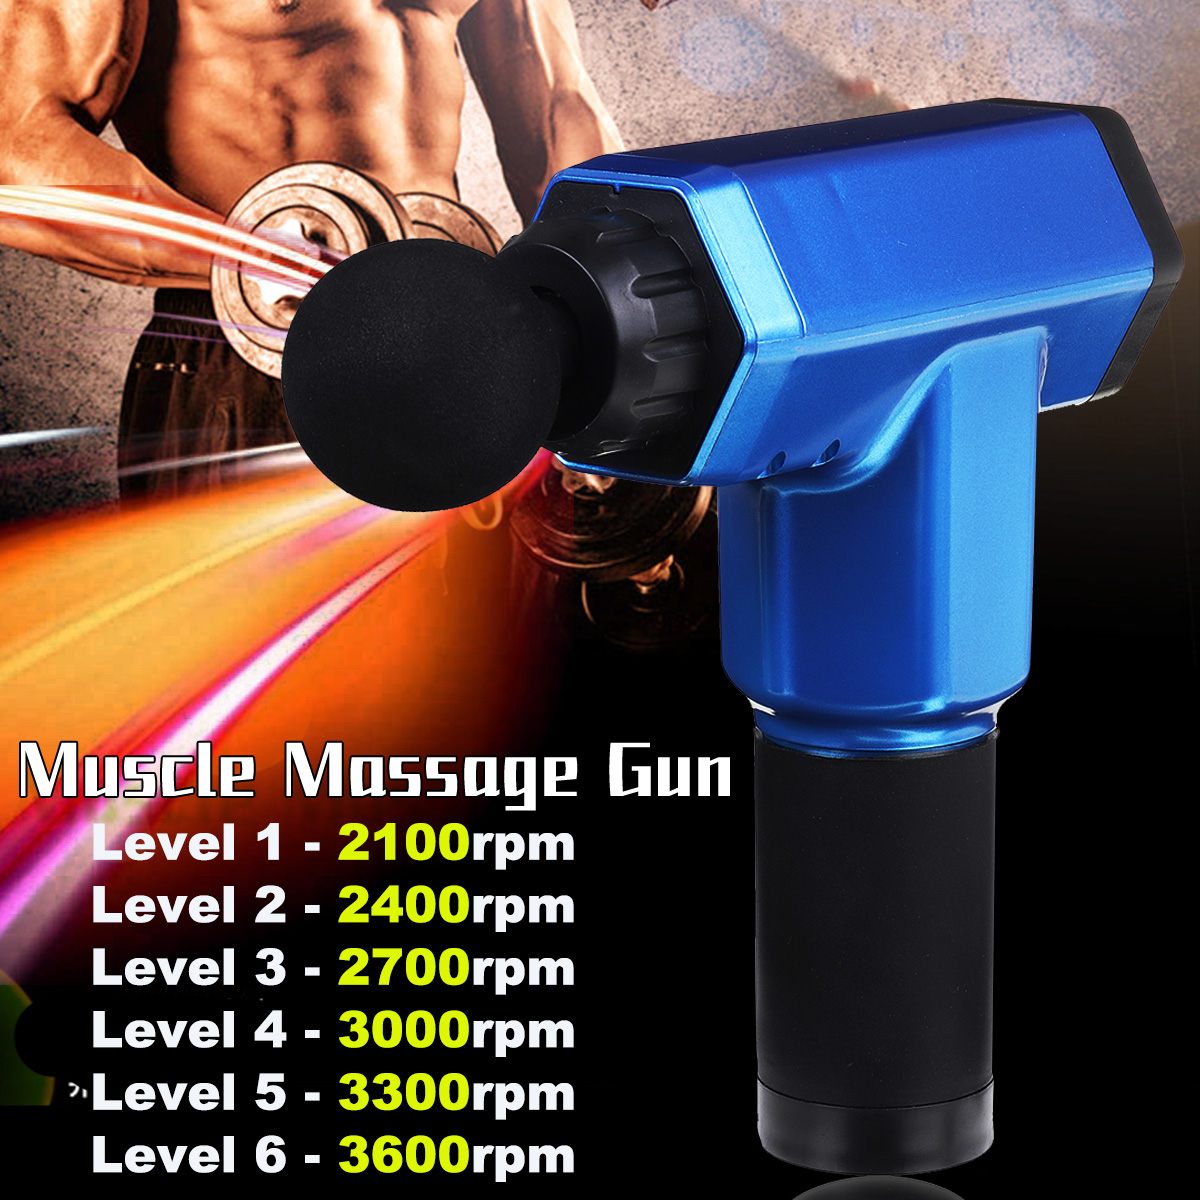 Electric-Muscle-Massager-6-speed-Adjustment-LED-Display-USB-Rechargeable-Fascia-Deep-Vibration-Physi-1710558-2